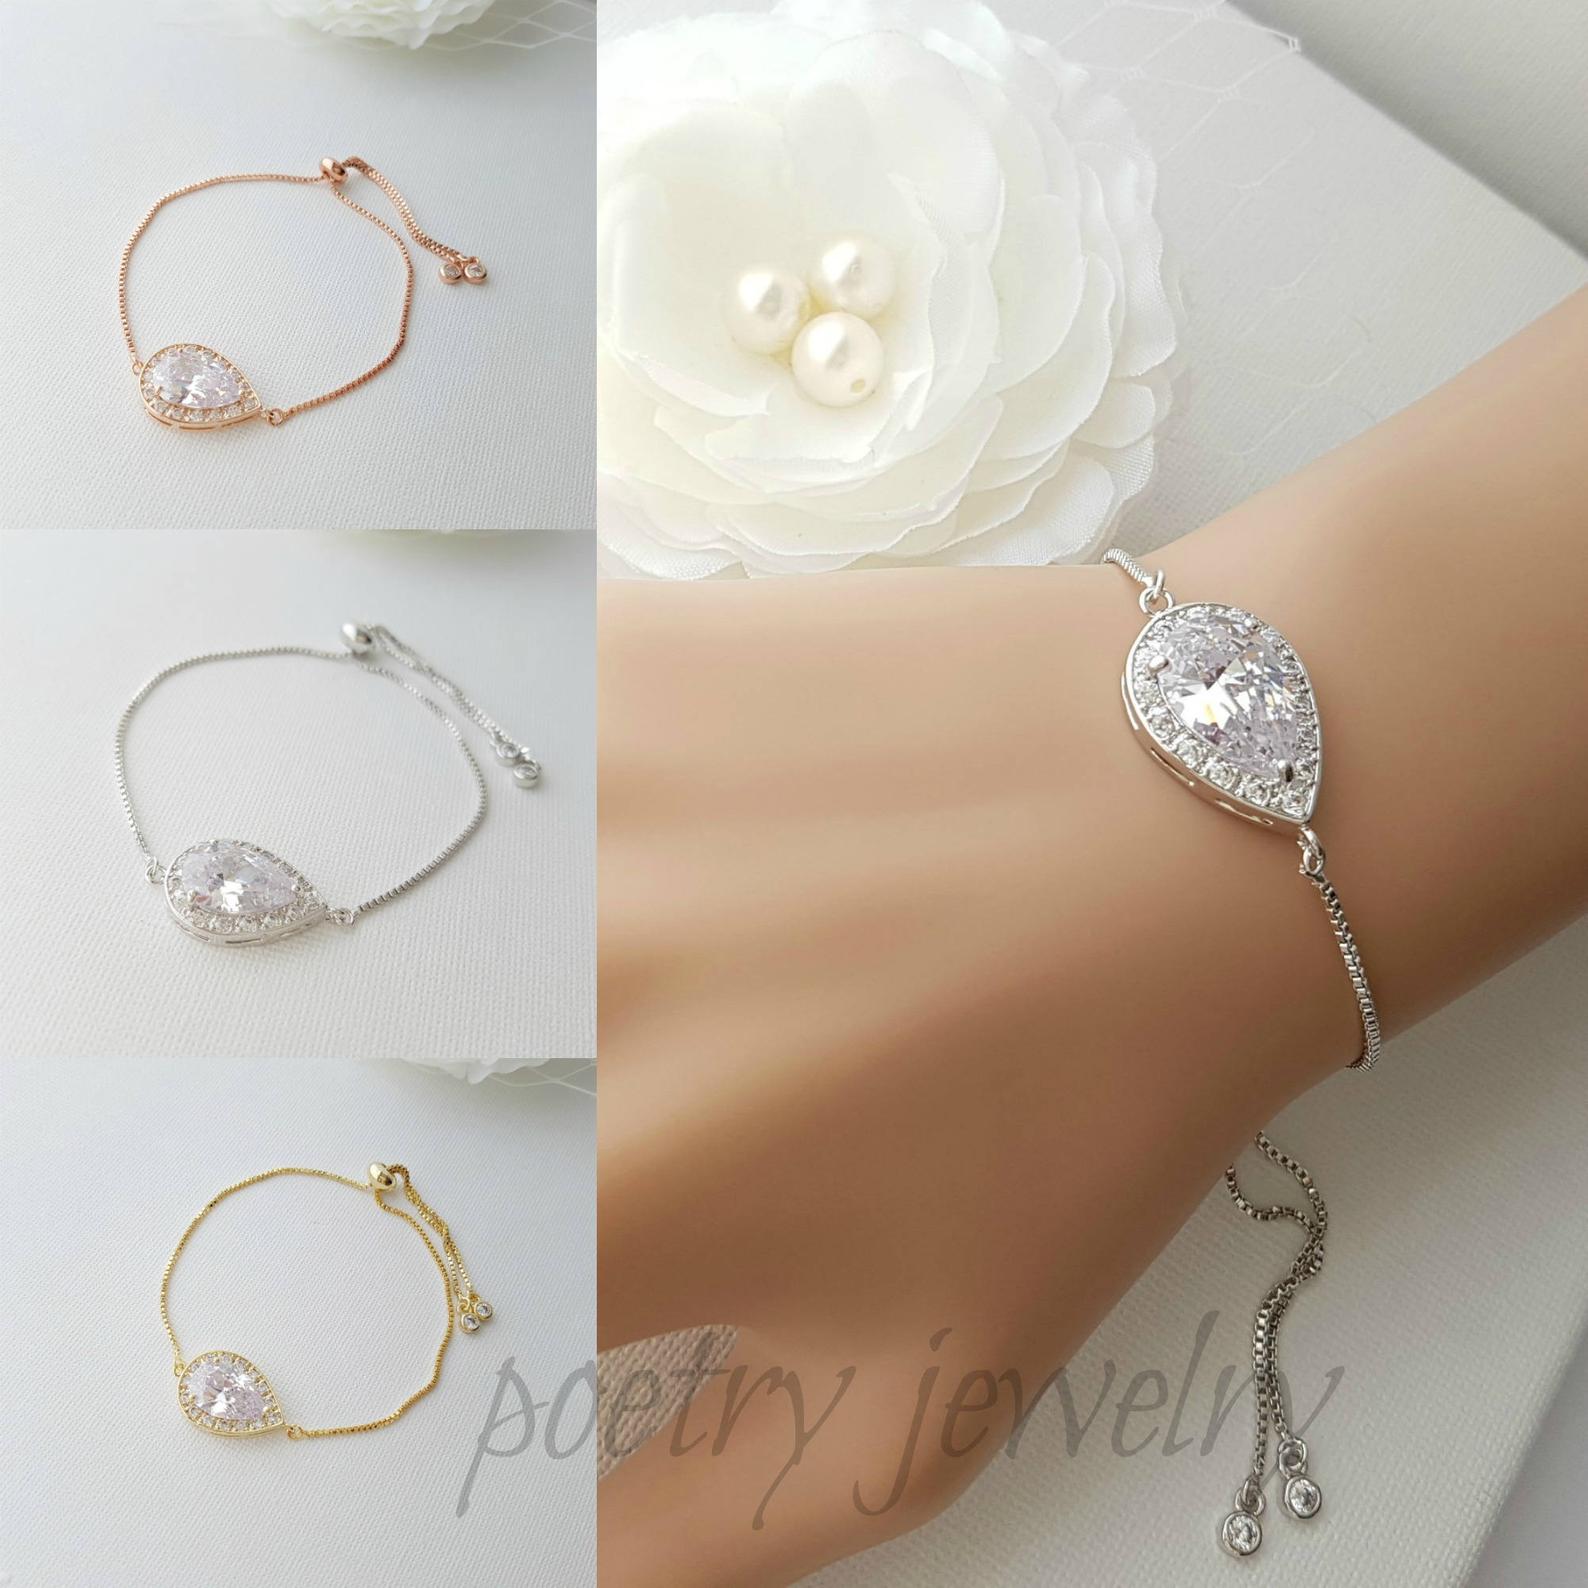 Bridesmaid Bracelet - Wedding - To Bridesmaid - Thank You For Being My -  Wrapsify